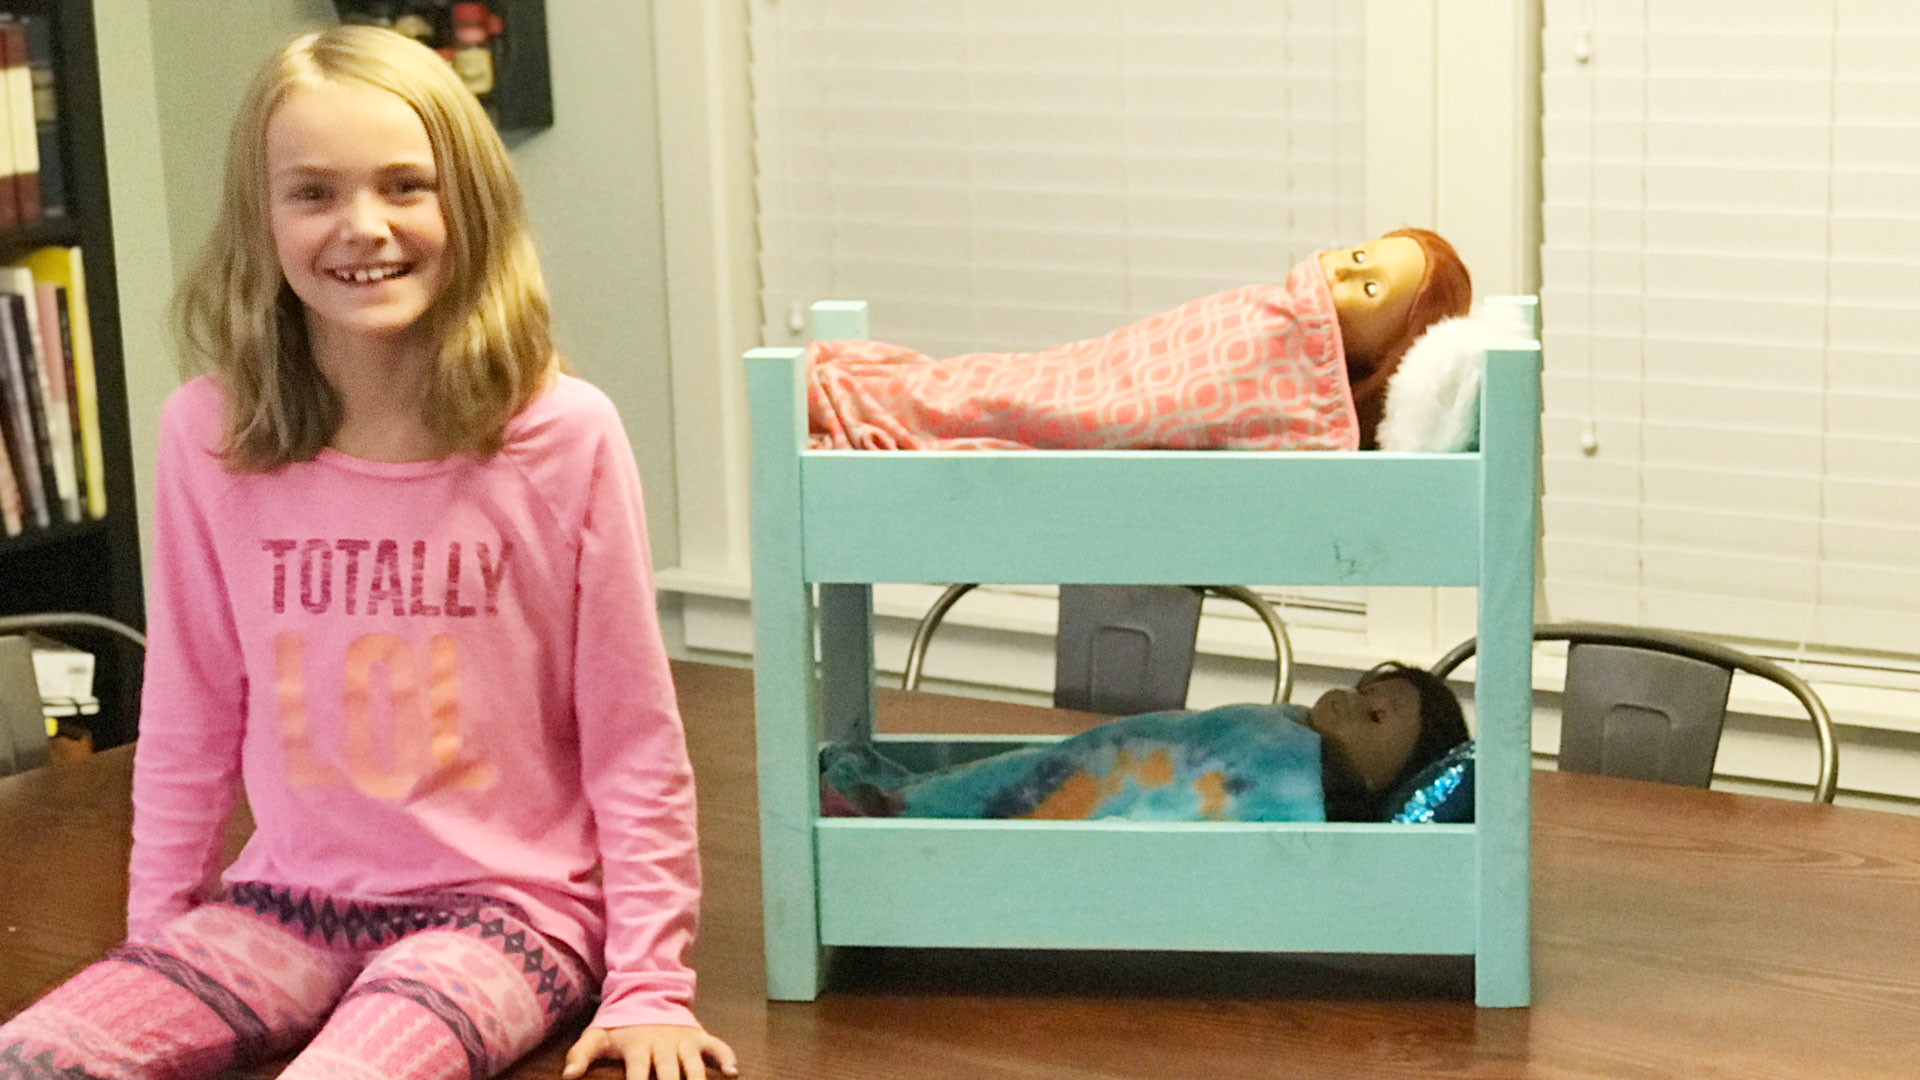 How To Build An American Girl Doll Bunk, American Girl Bunk Bed Plans